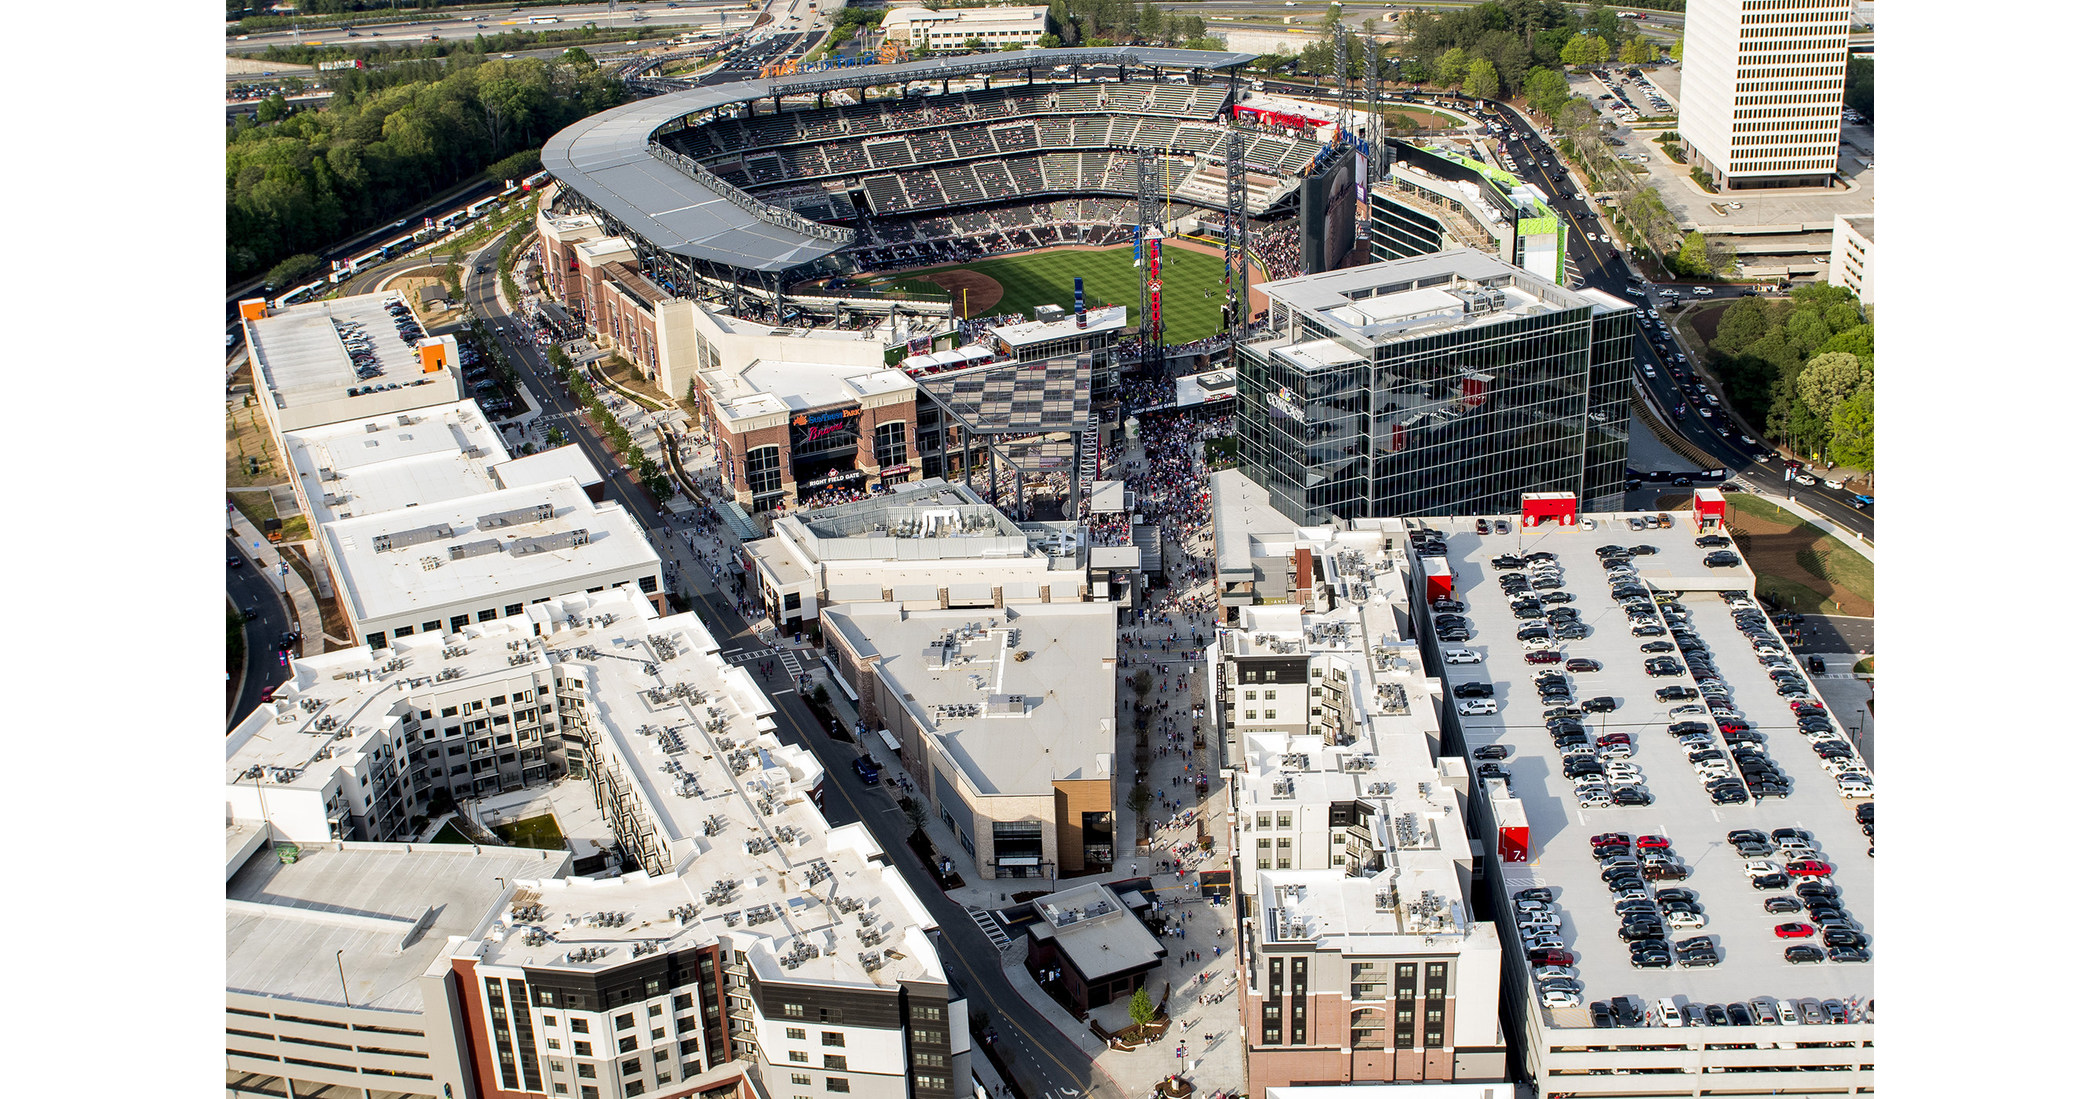 Photos: Here's a sneak peak of The Battery by Braves' SunTrust Park